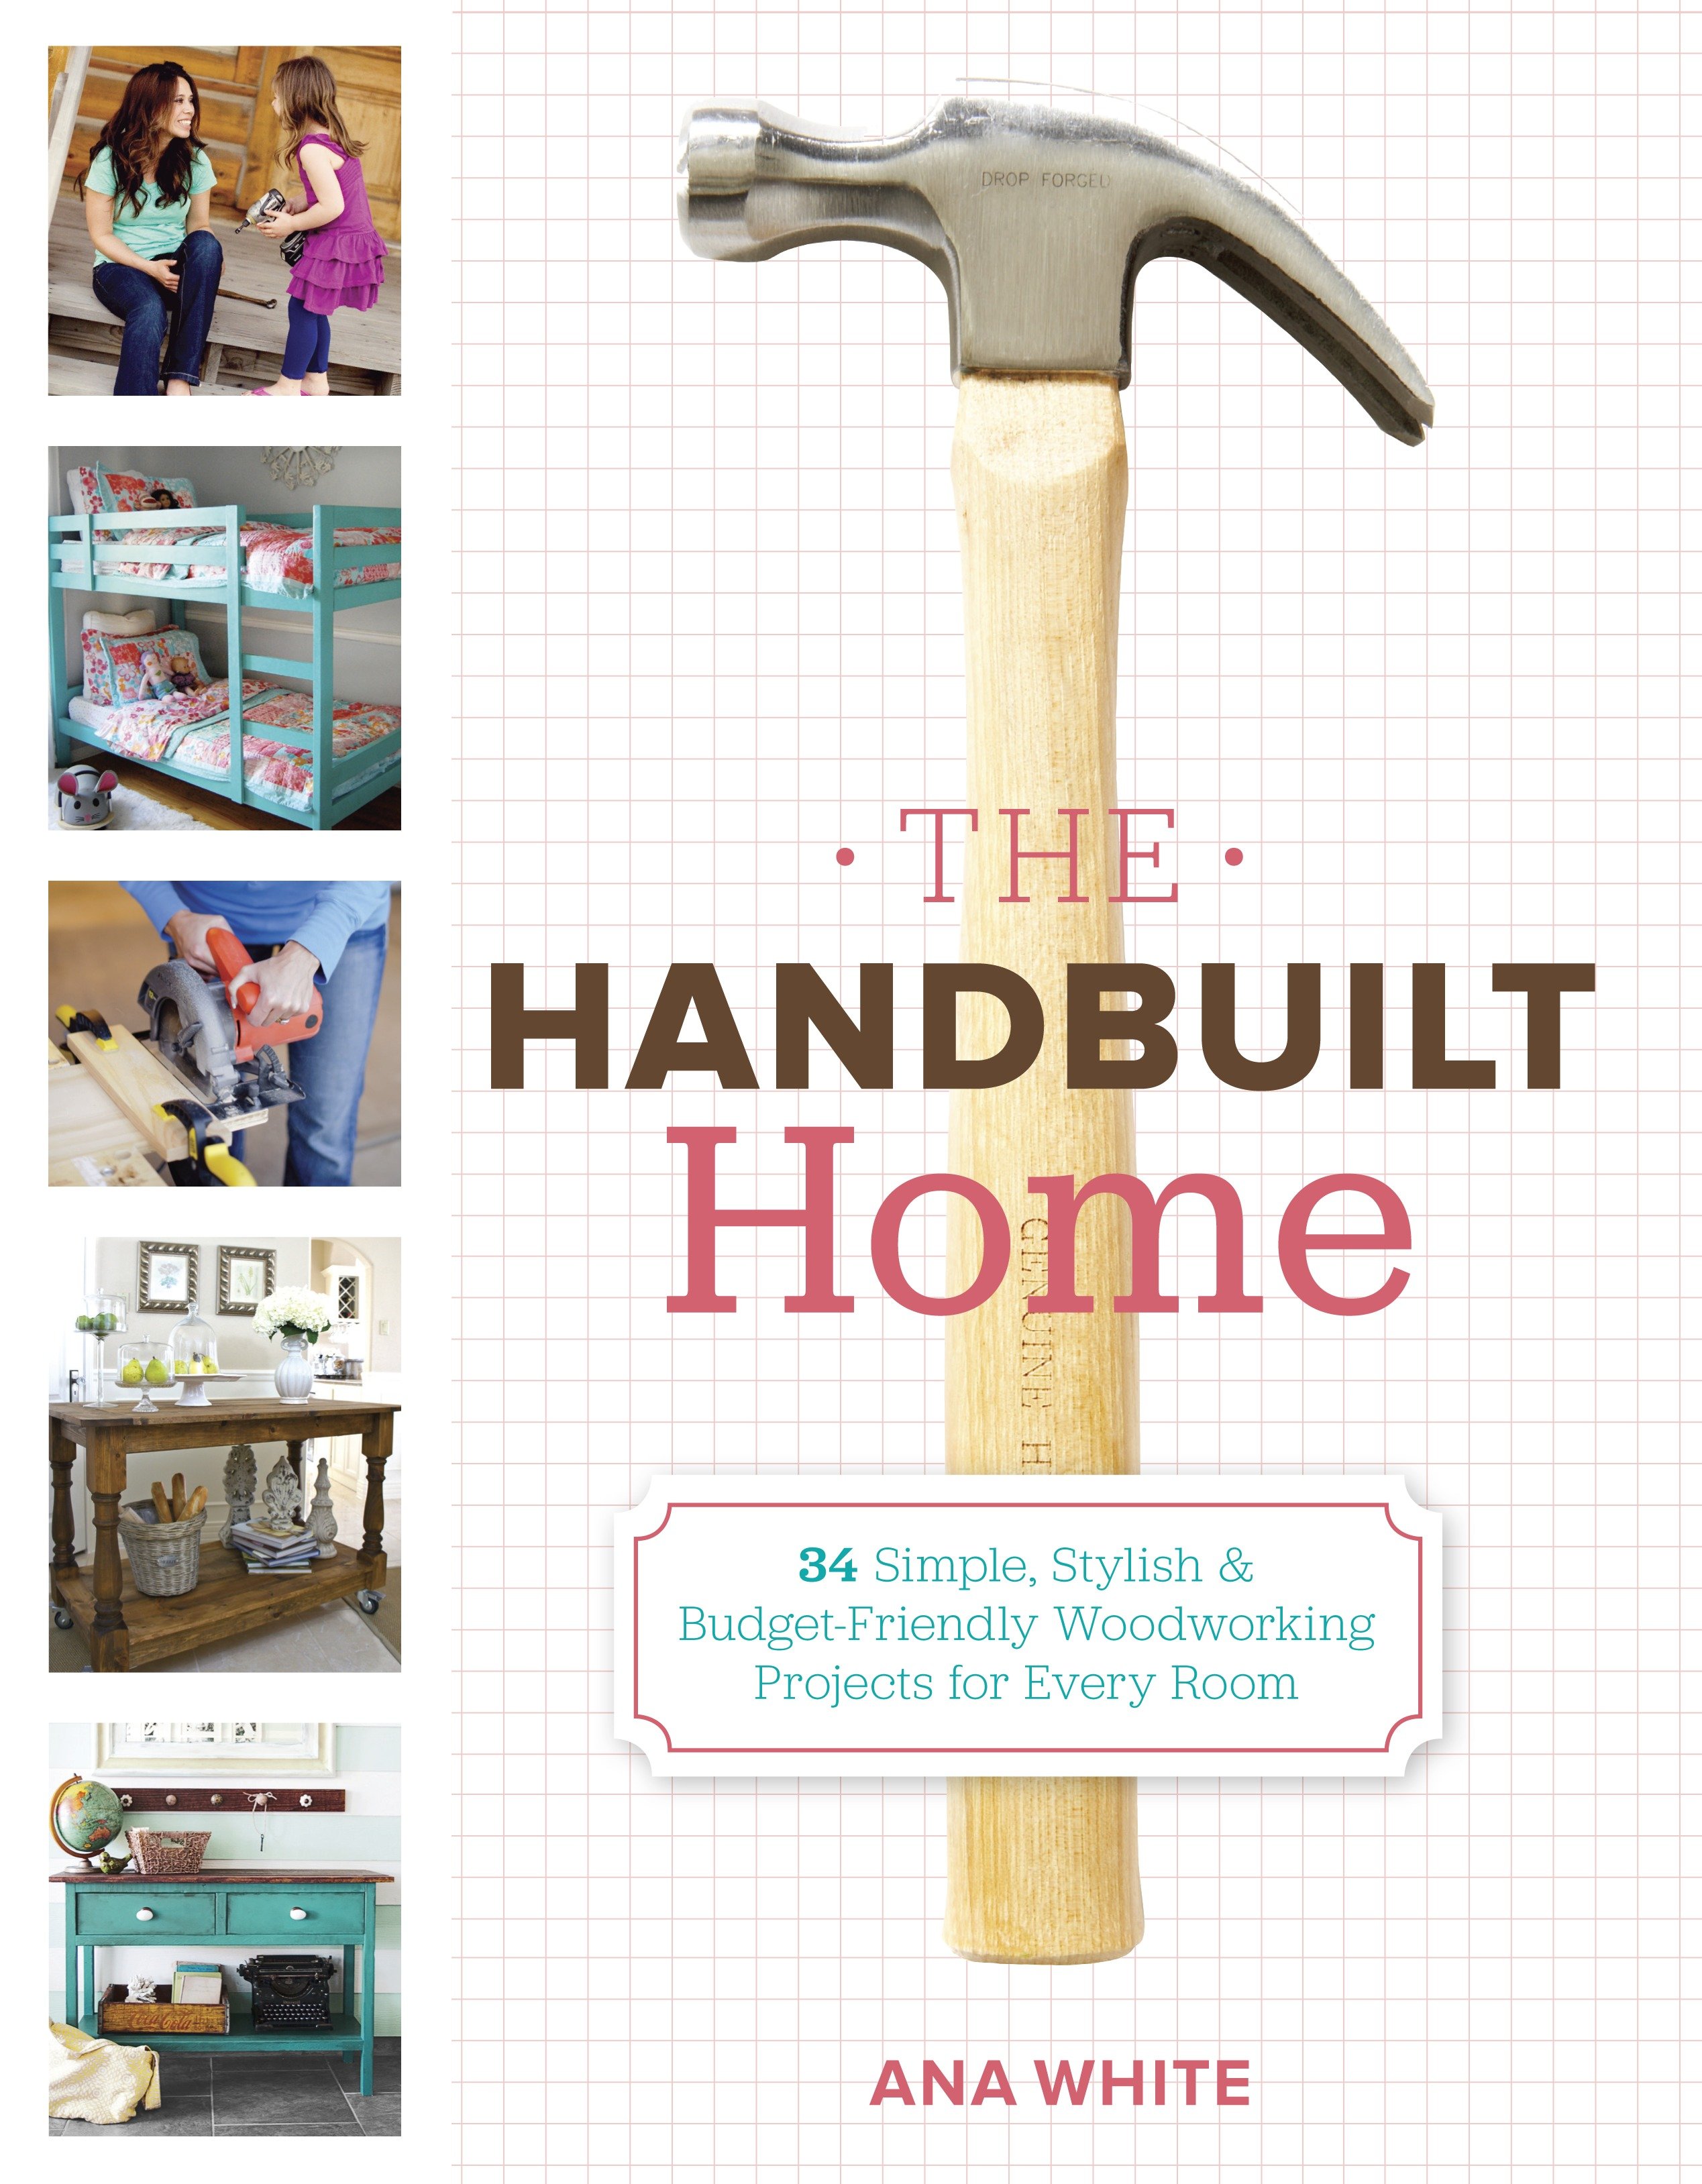 The handbuilt home 34 simple stylish and budget-friendly woodworking projects for every room cover image